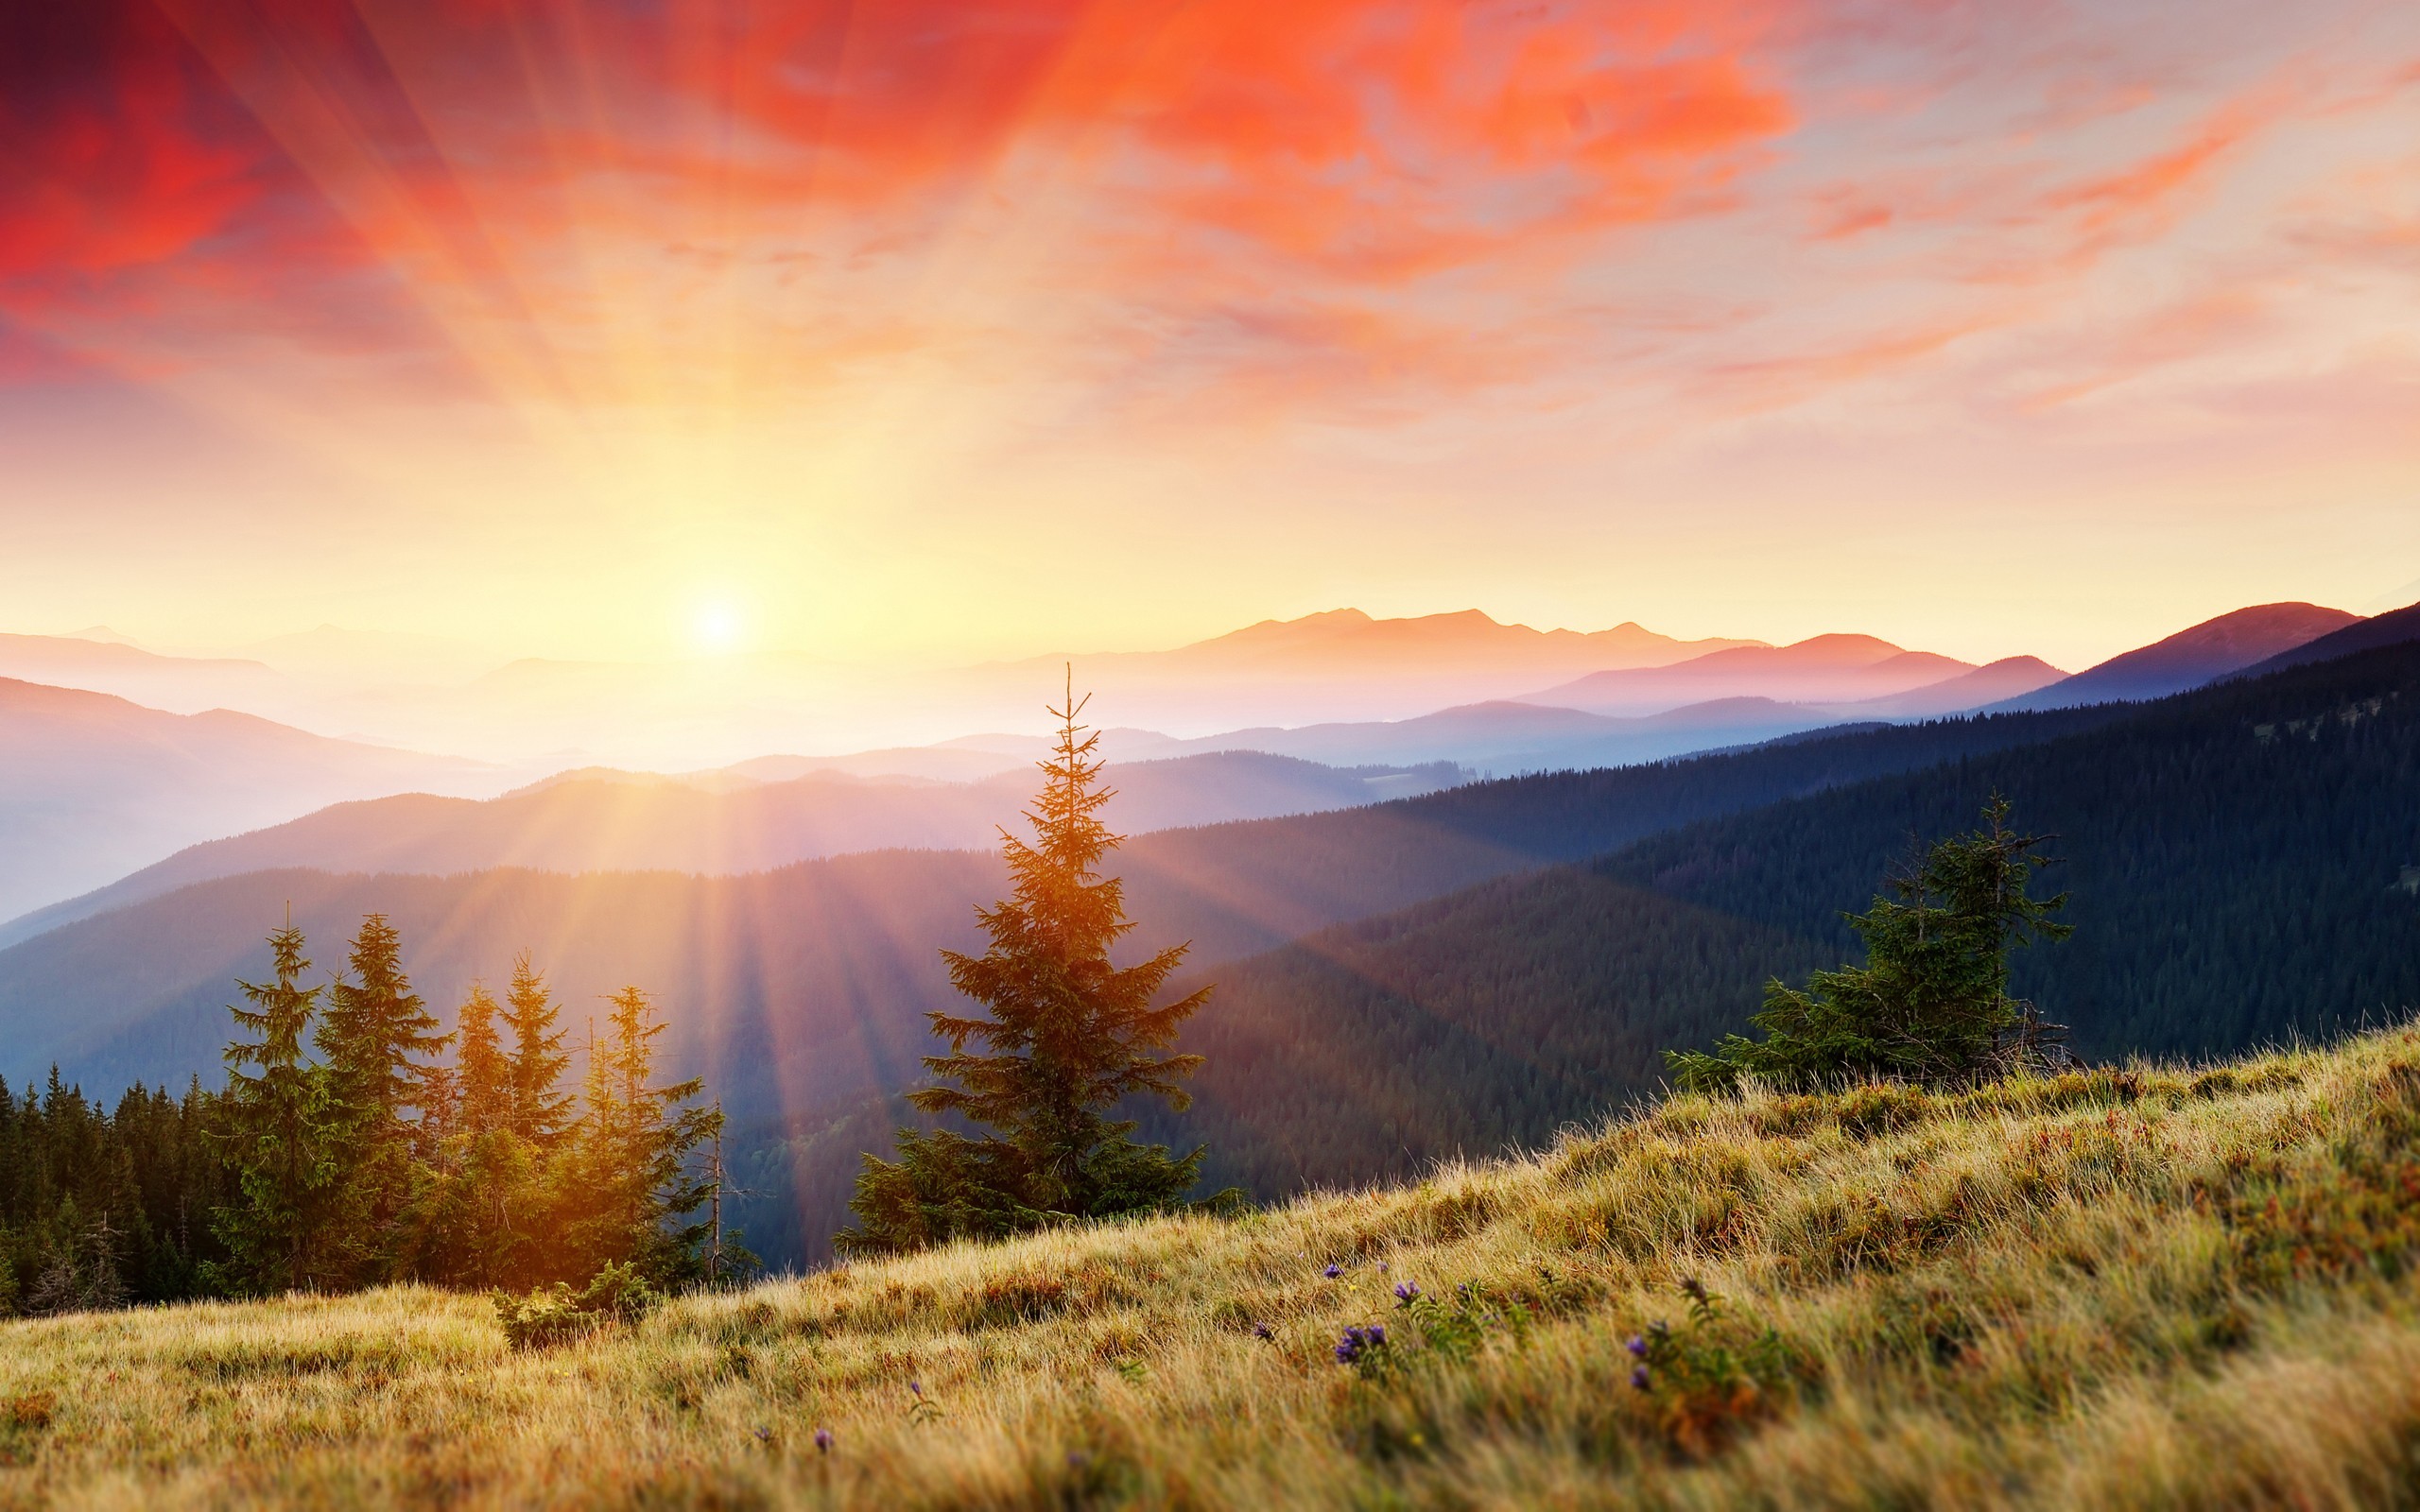 General 2560x1600 landscape nature mountains sun rays clouds sunlight outdoors